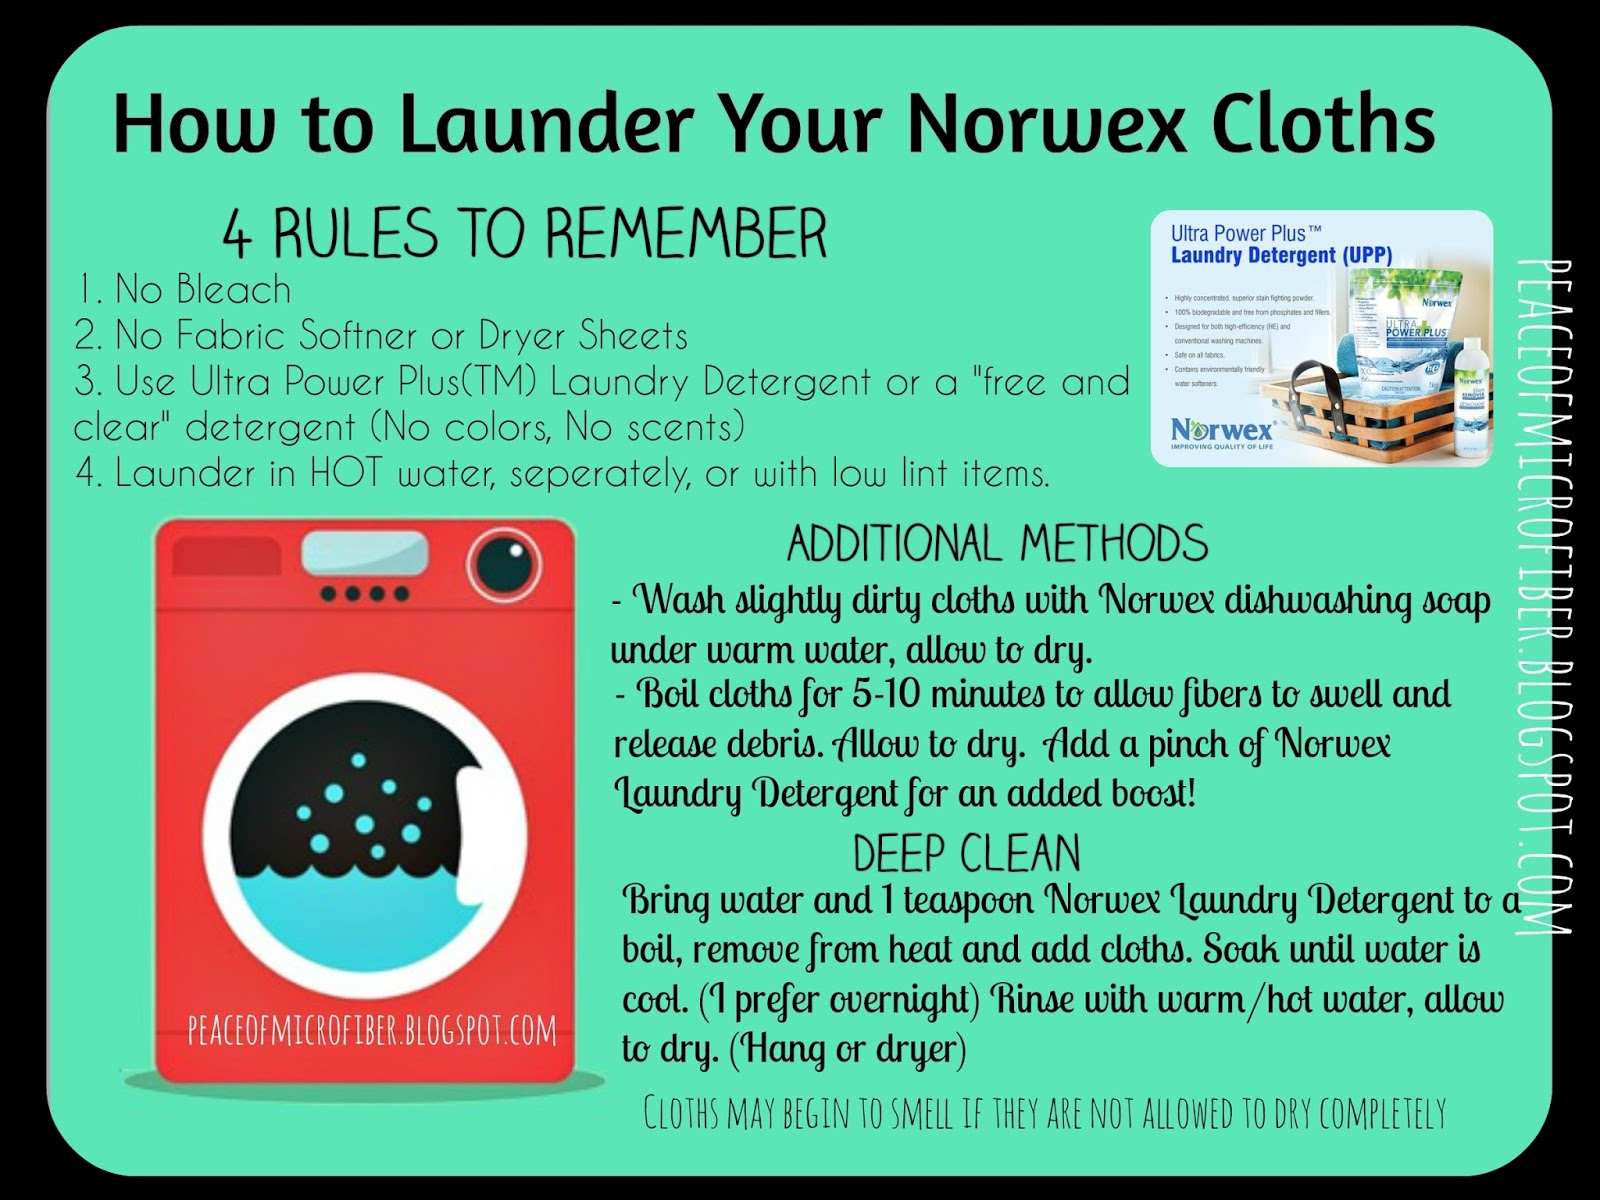 Cleaning up Confusion About which Norwex Cloth to Use in the